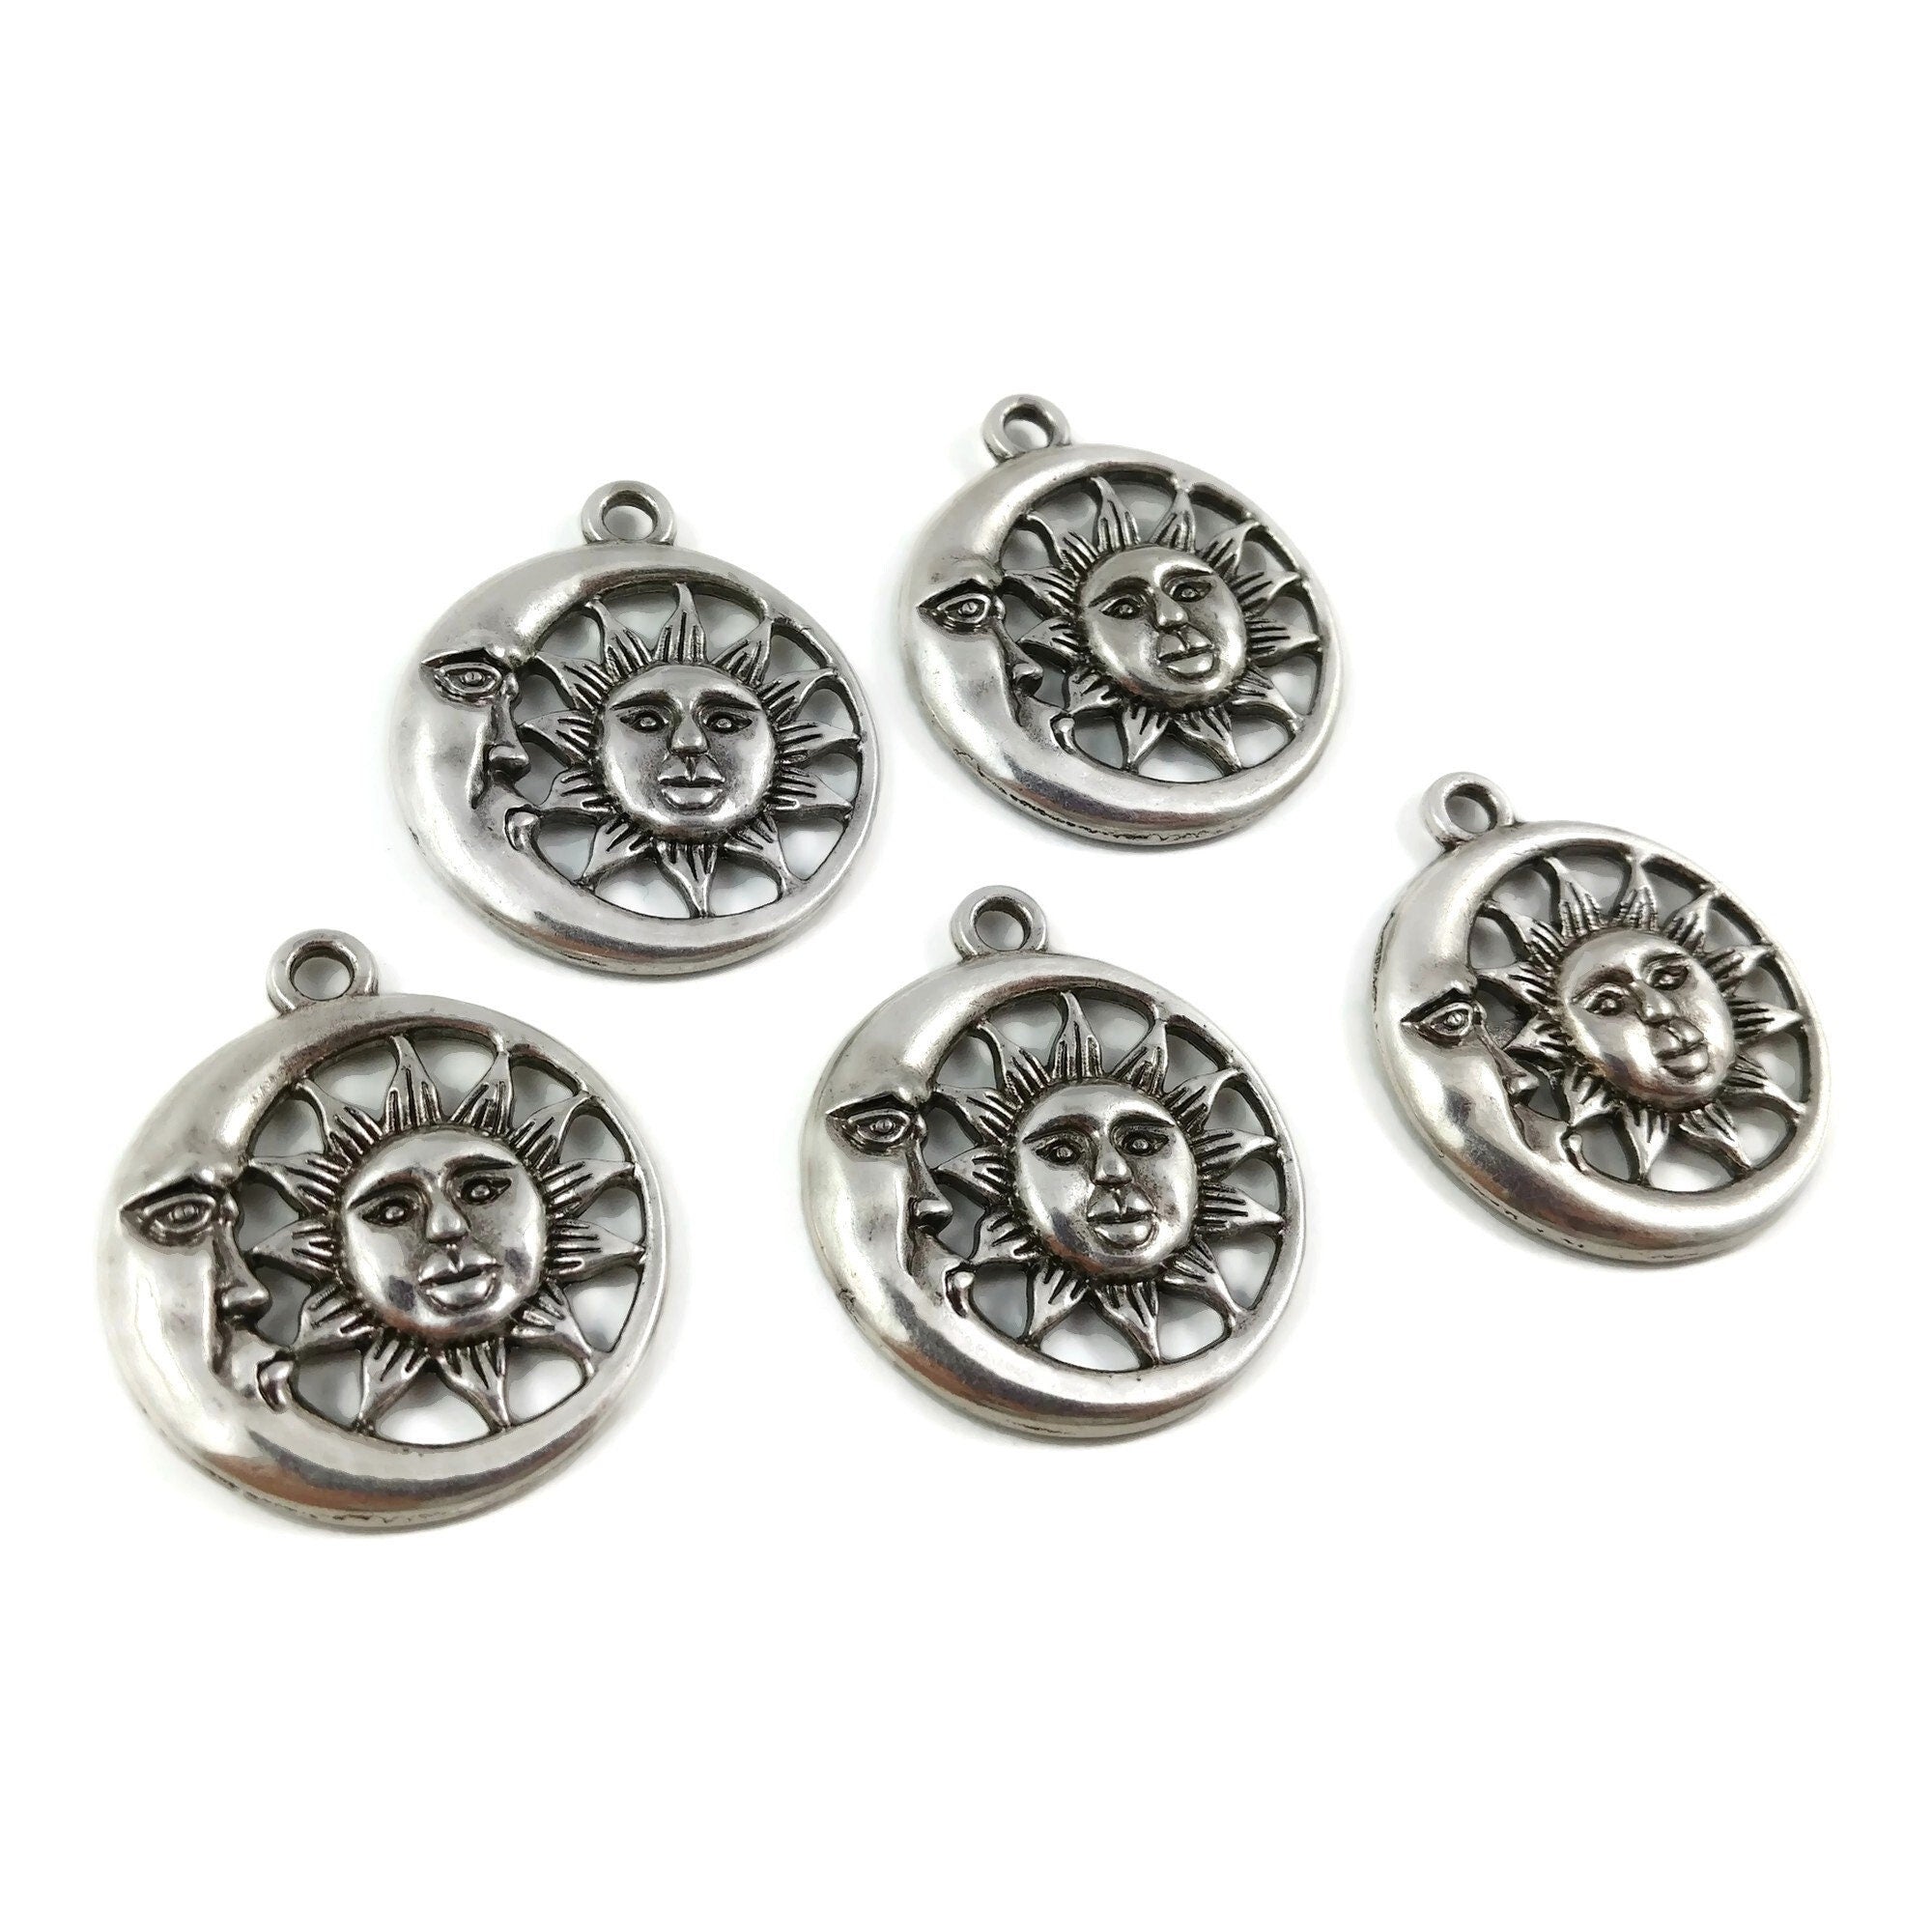 60pcs Unhappy Cat Antique Silver Charms for jewelry making